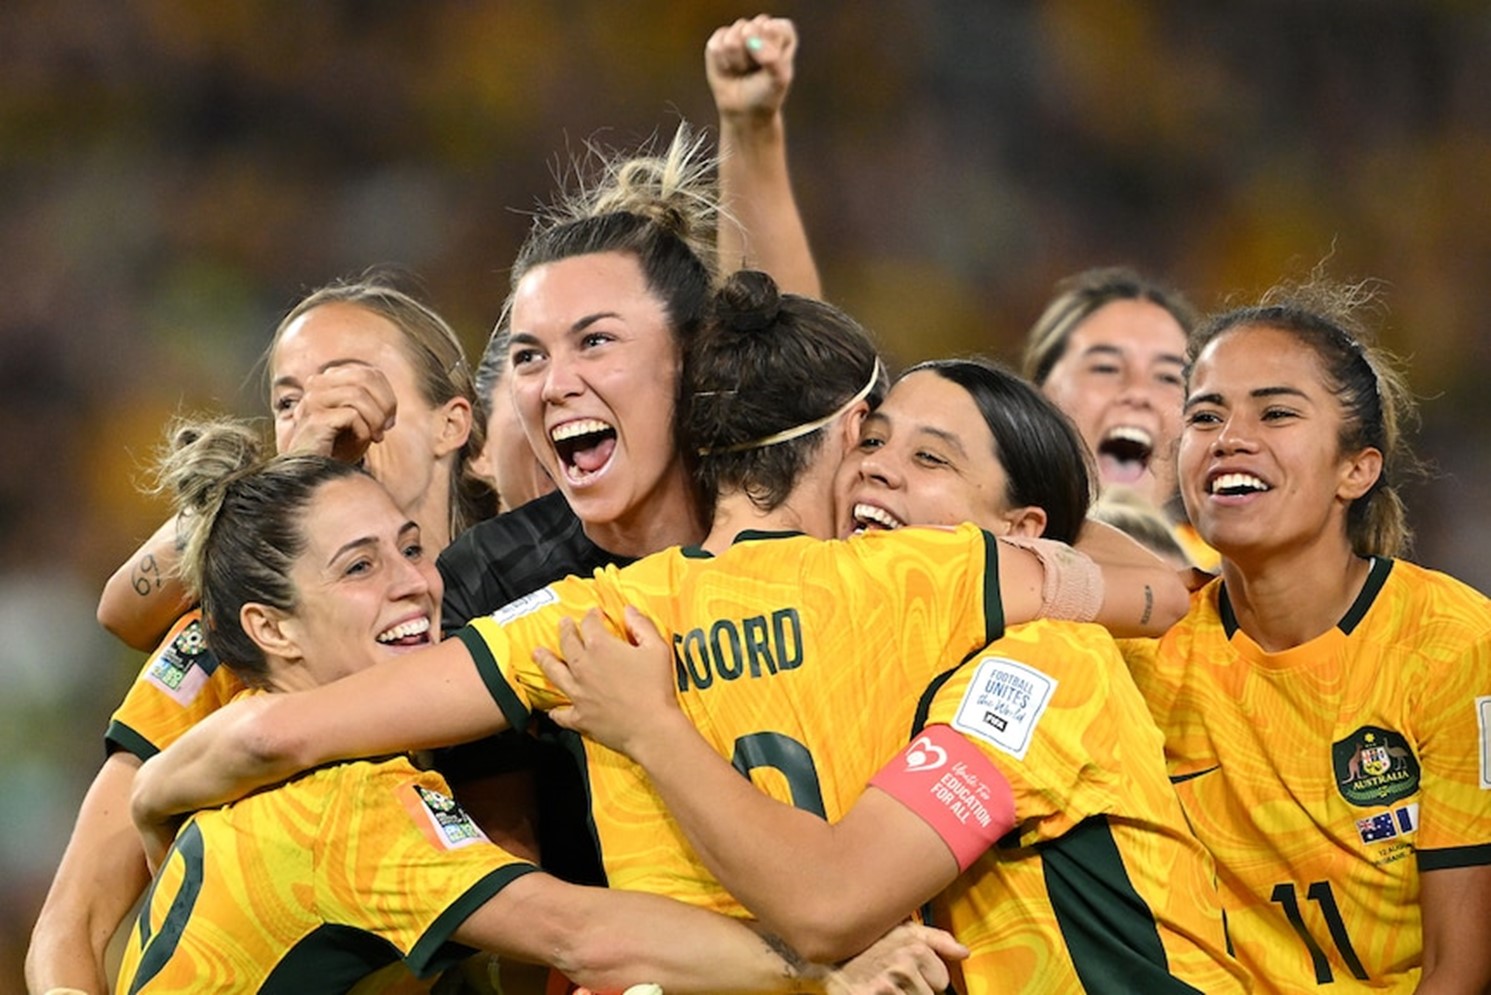 Our Matildas show leadership on the pitch